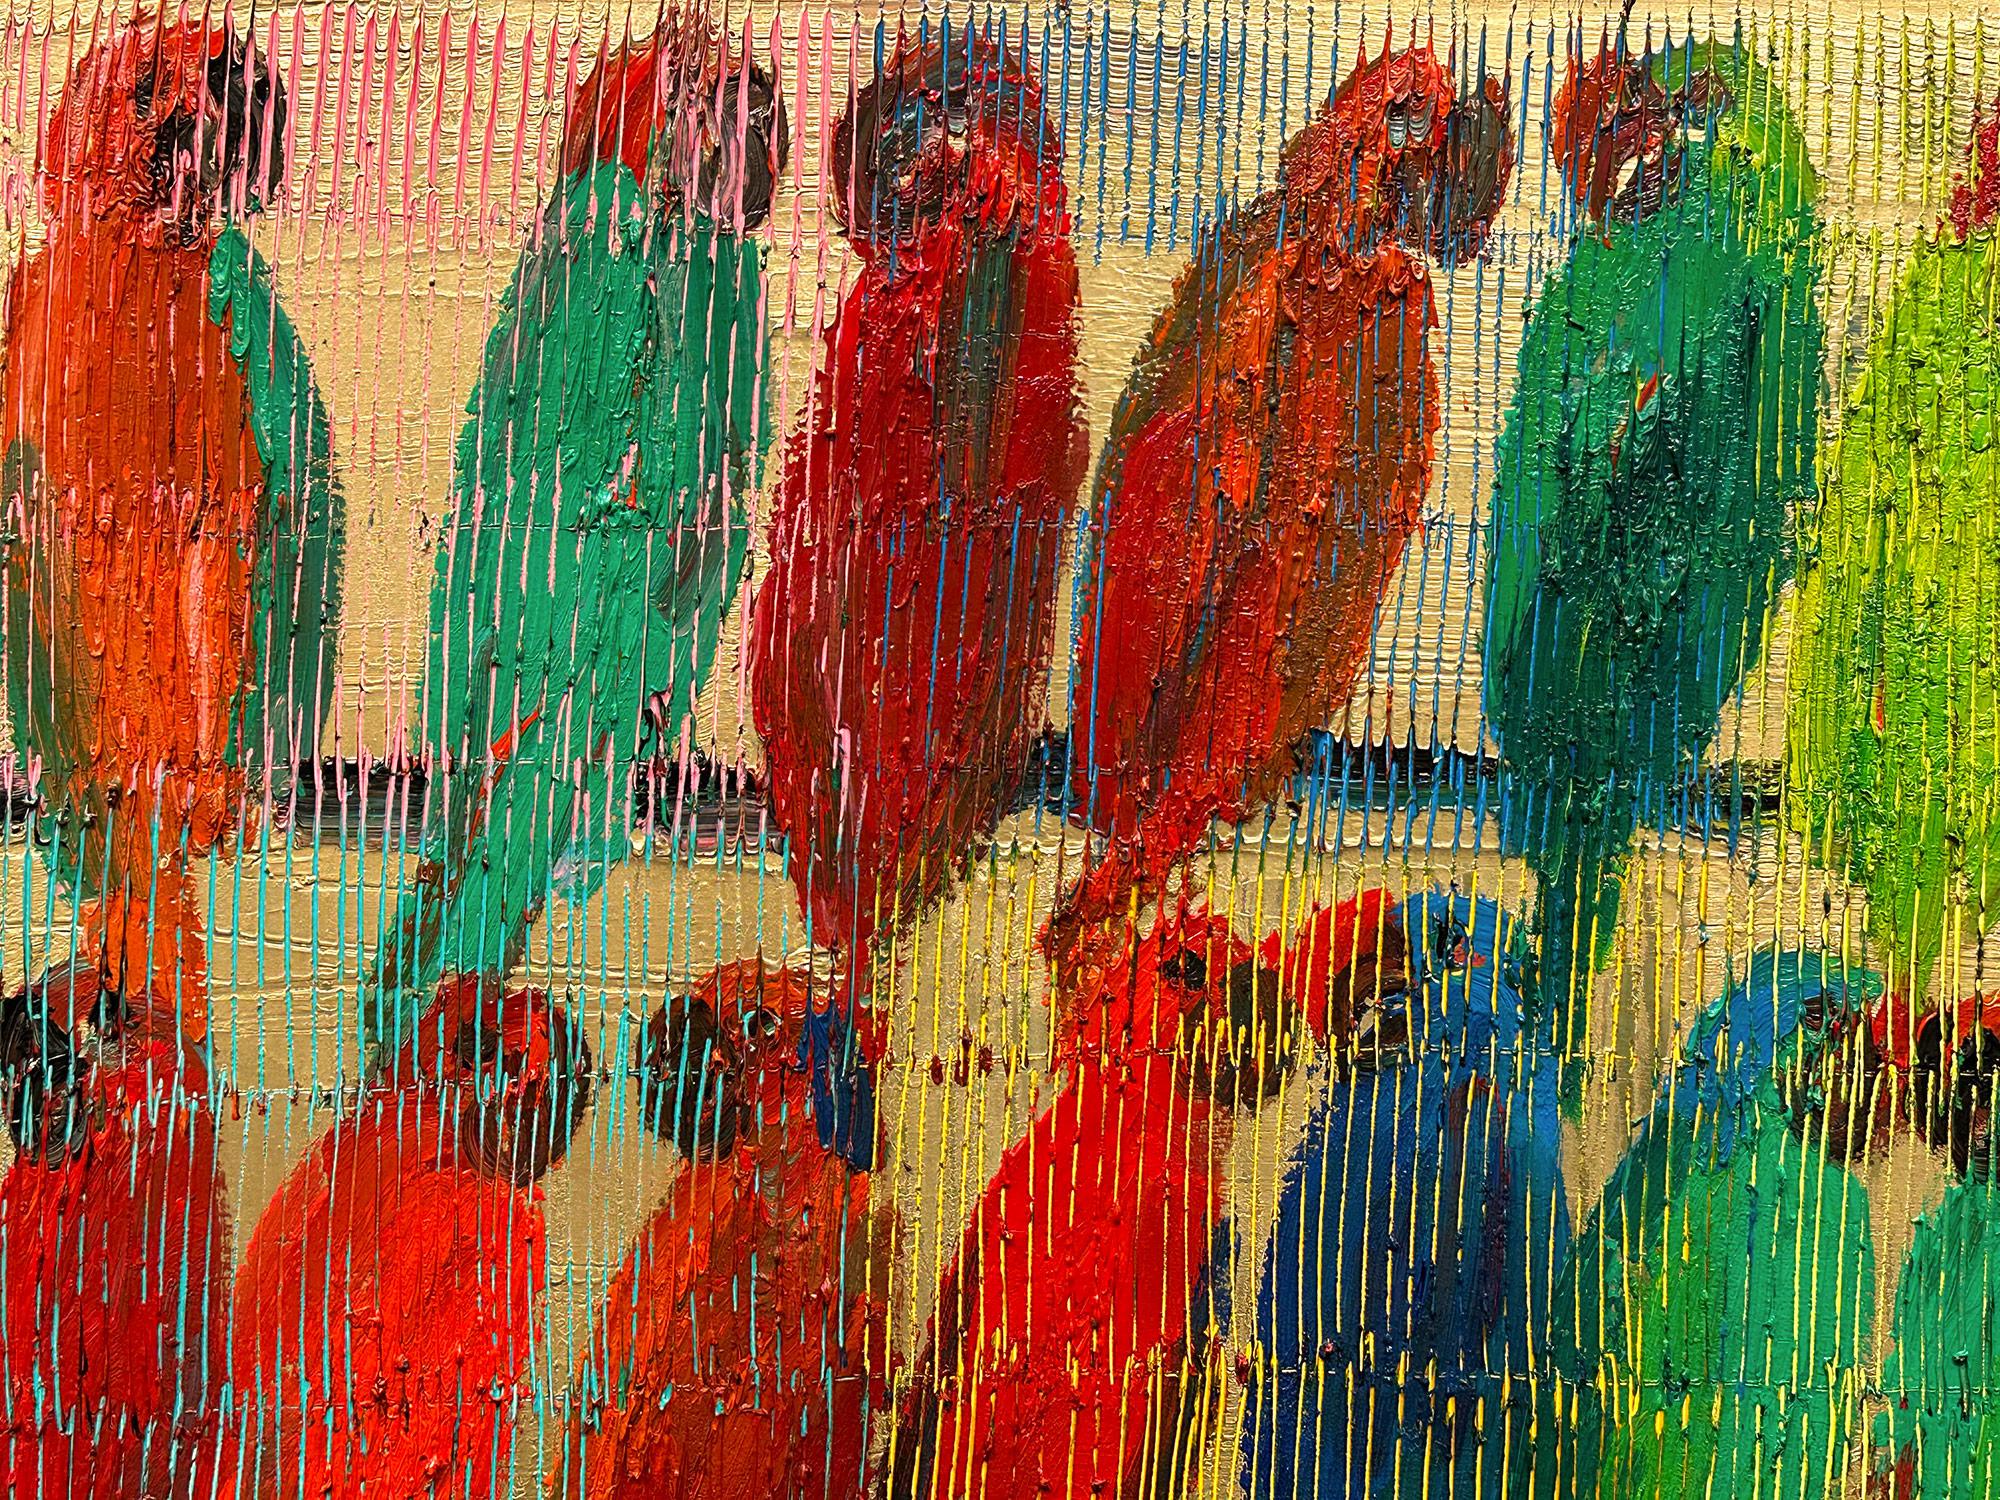 A wonderful composition of one of Slonem's most iconic subjects of Cockatoos. The thick use of paint is greatly recognizable as he slathers on layer after layer of colorful oils on a golden rich background. He then draws in these whimsical birds